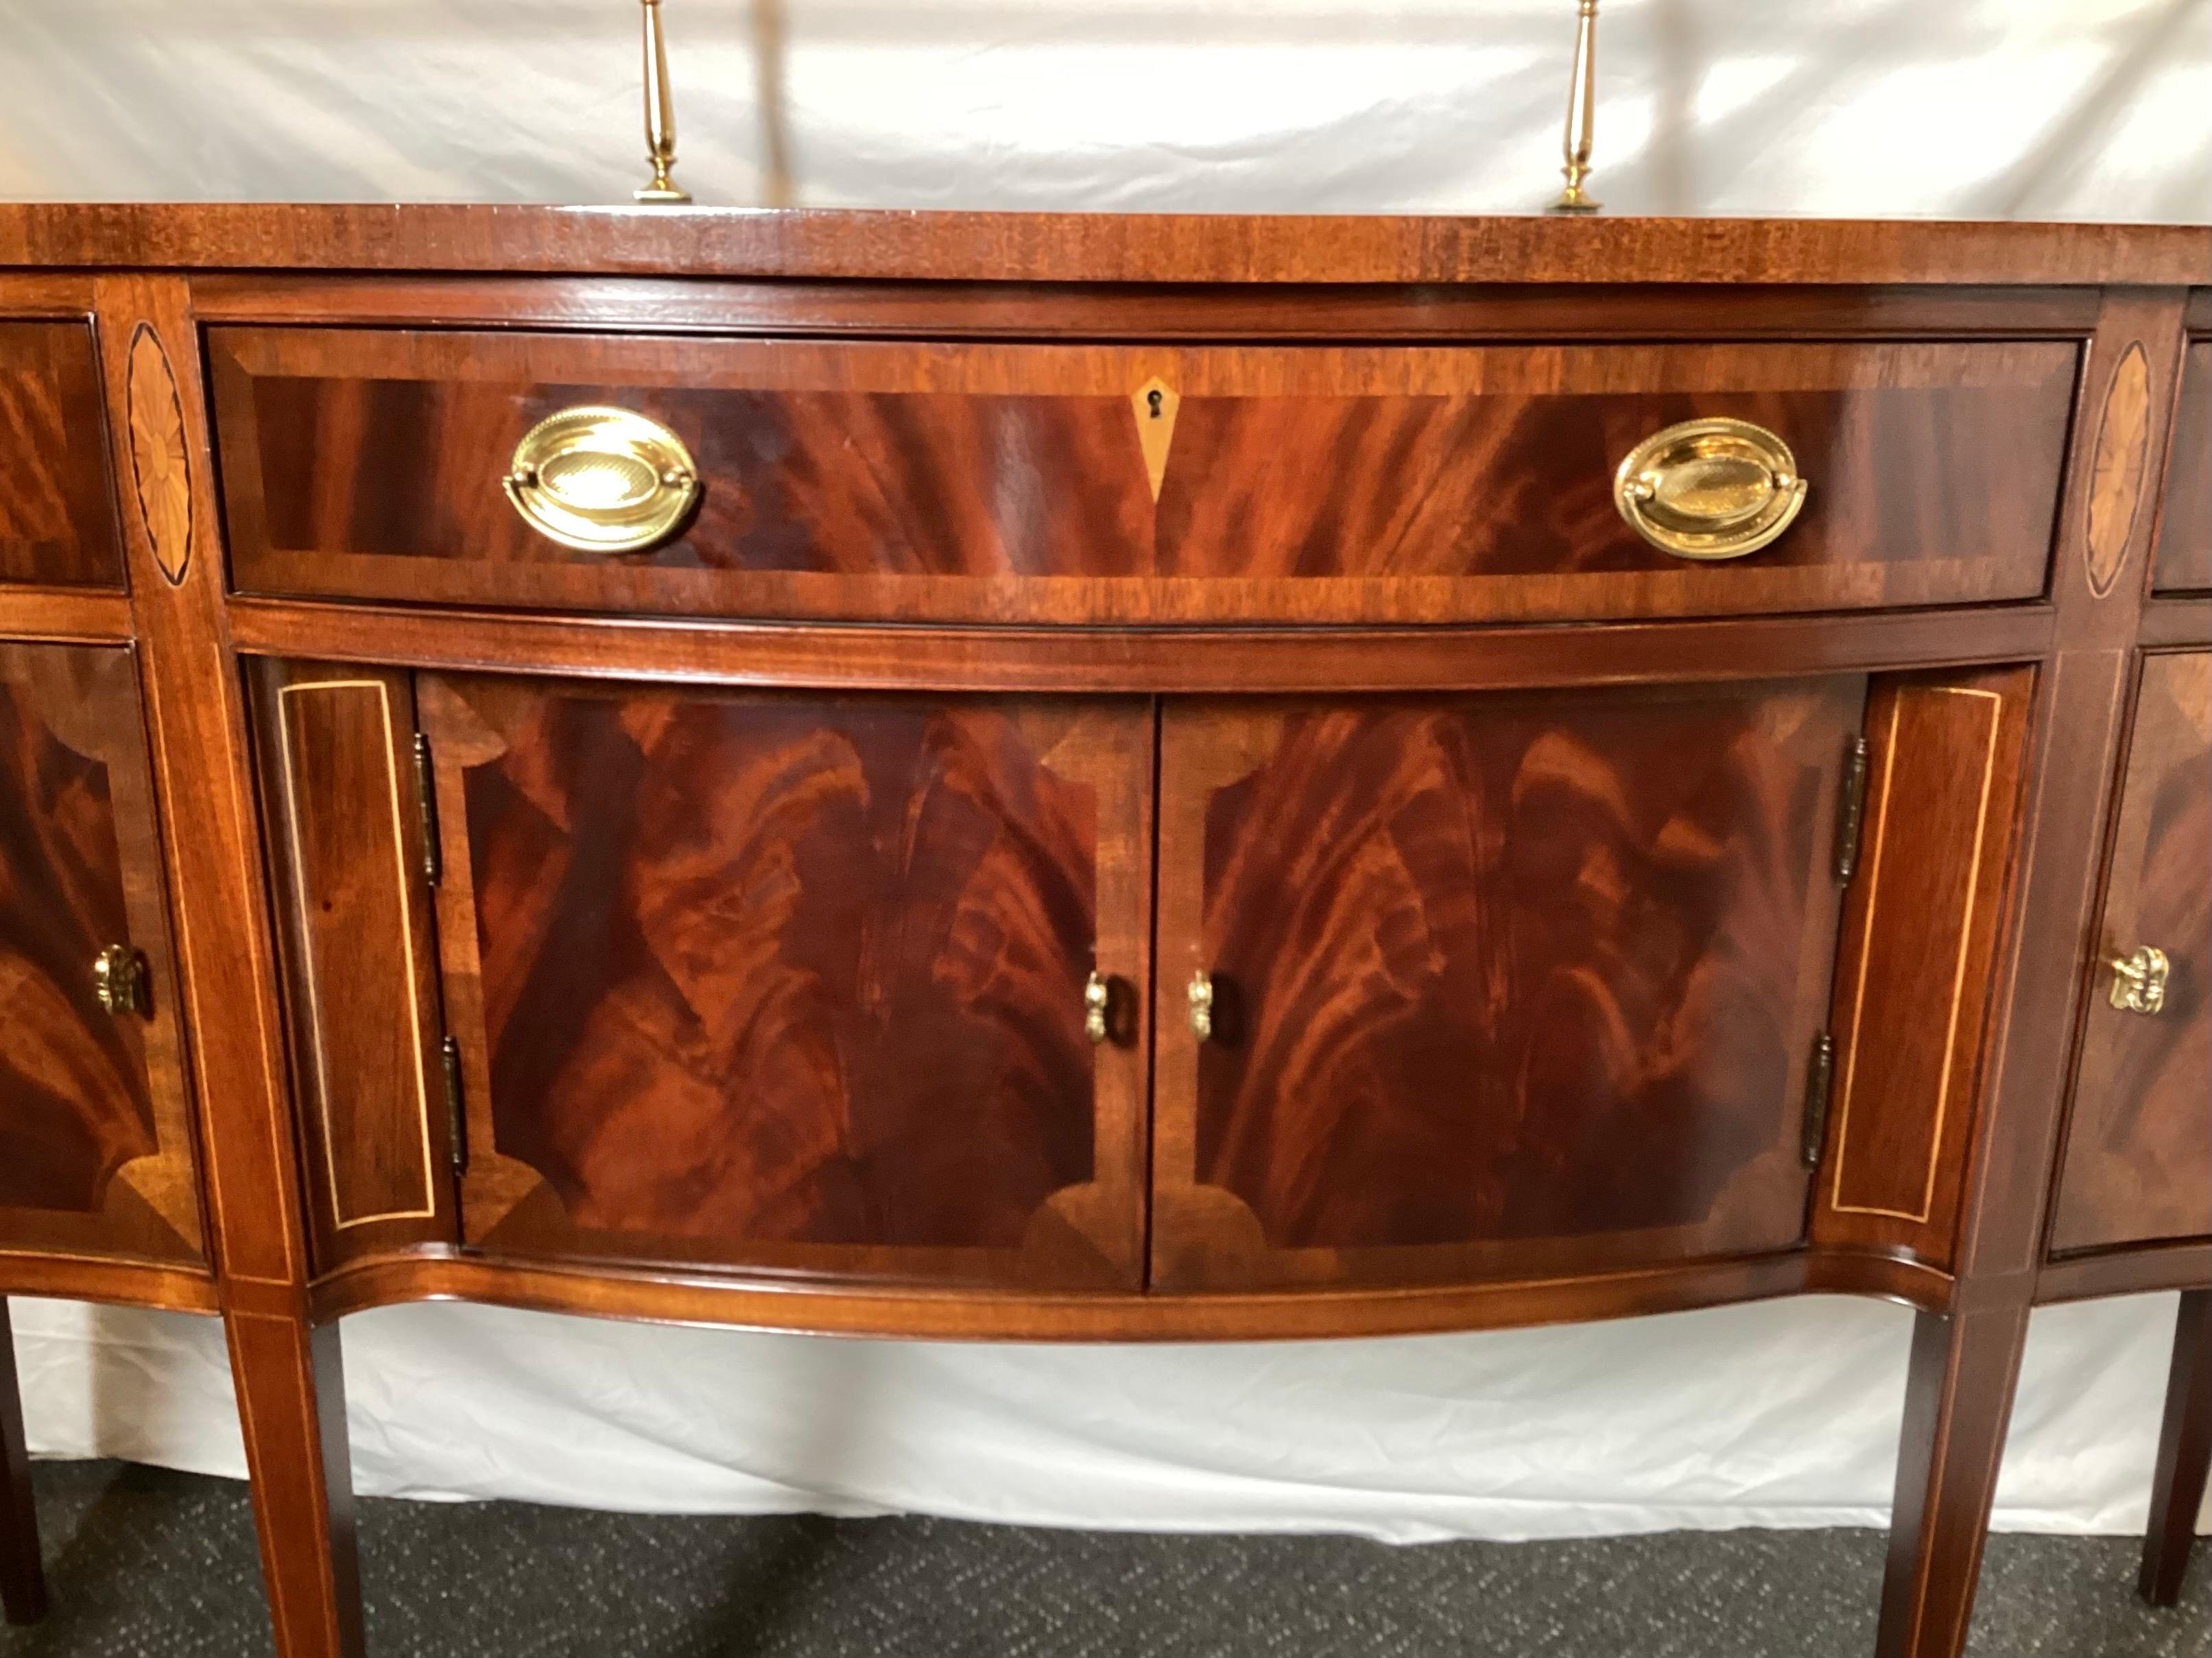 Hepplewhite American Made Mahogany and Satinwood Sideboard by Hickory Chair